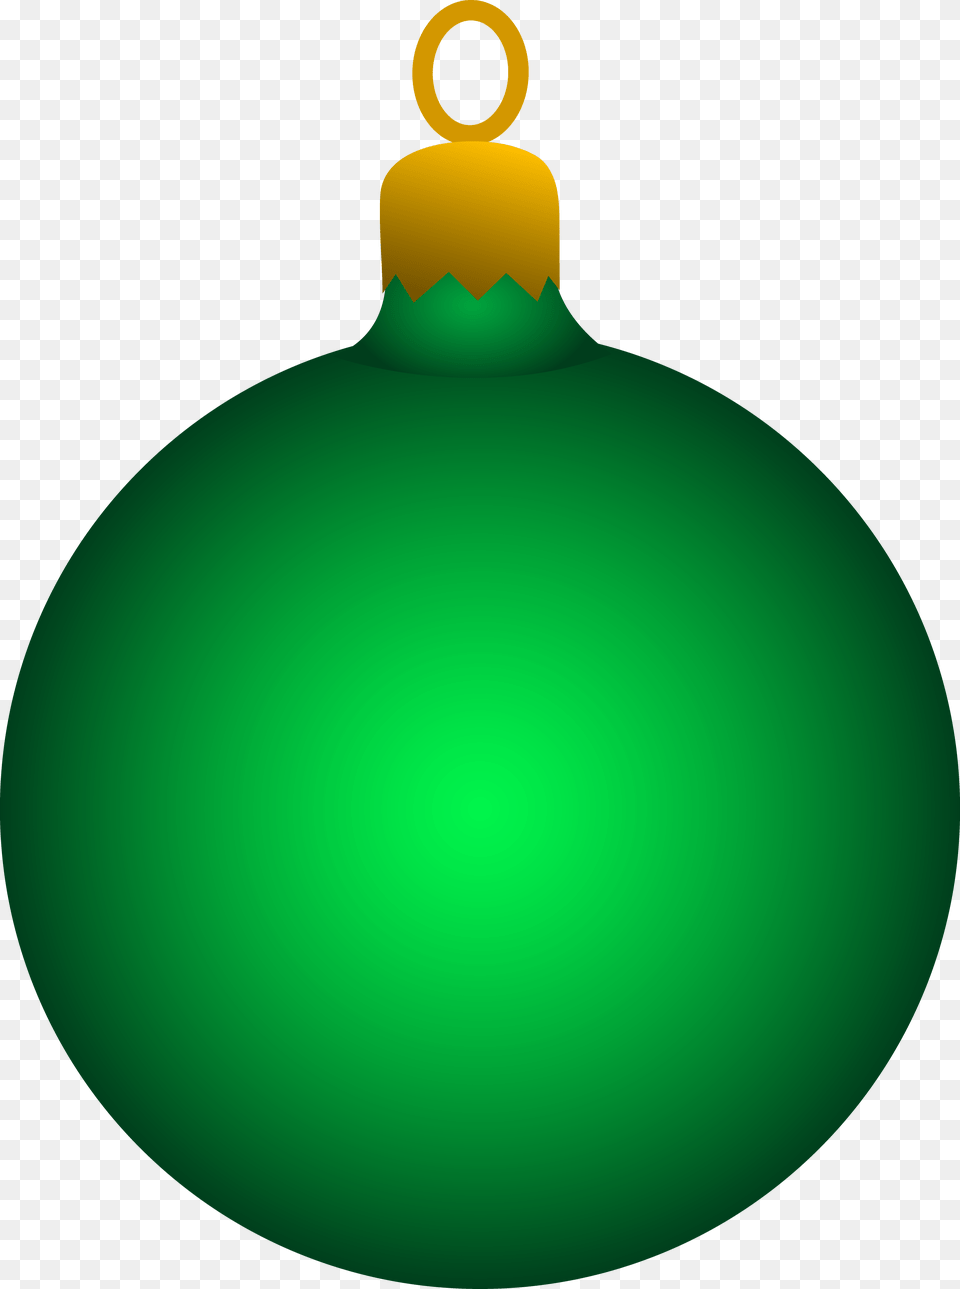 Green Christmas Ornament Green Christmas Ornament Clipart, Accessories, Sphere, Lighting, Gemstone Png Image